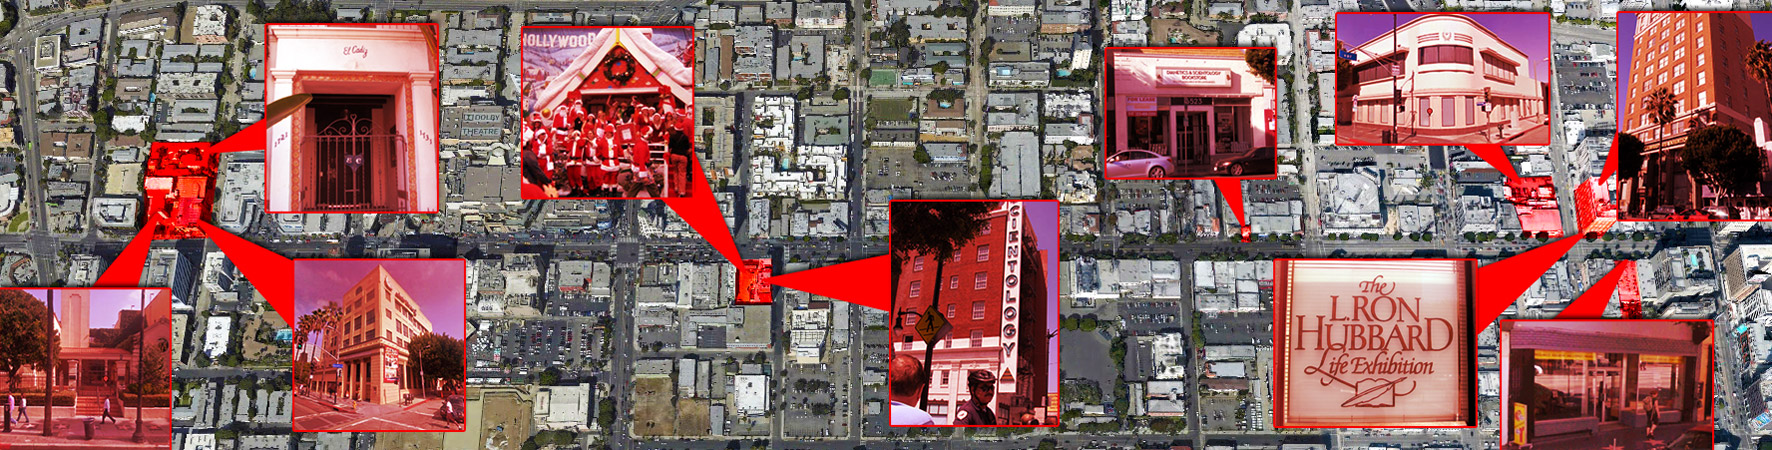 map of scientology hollywood boulevard properties